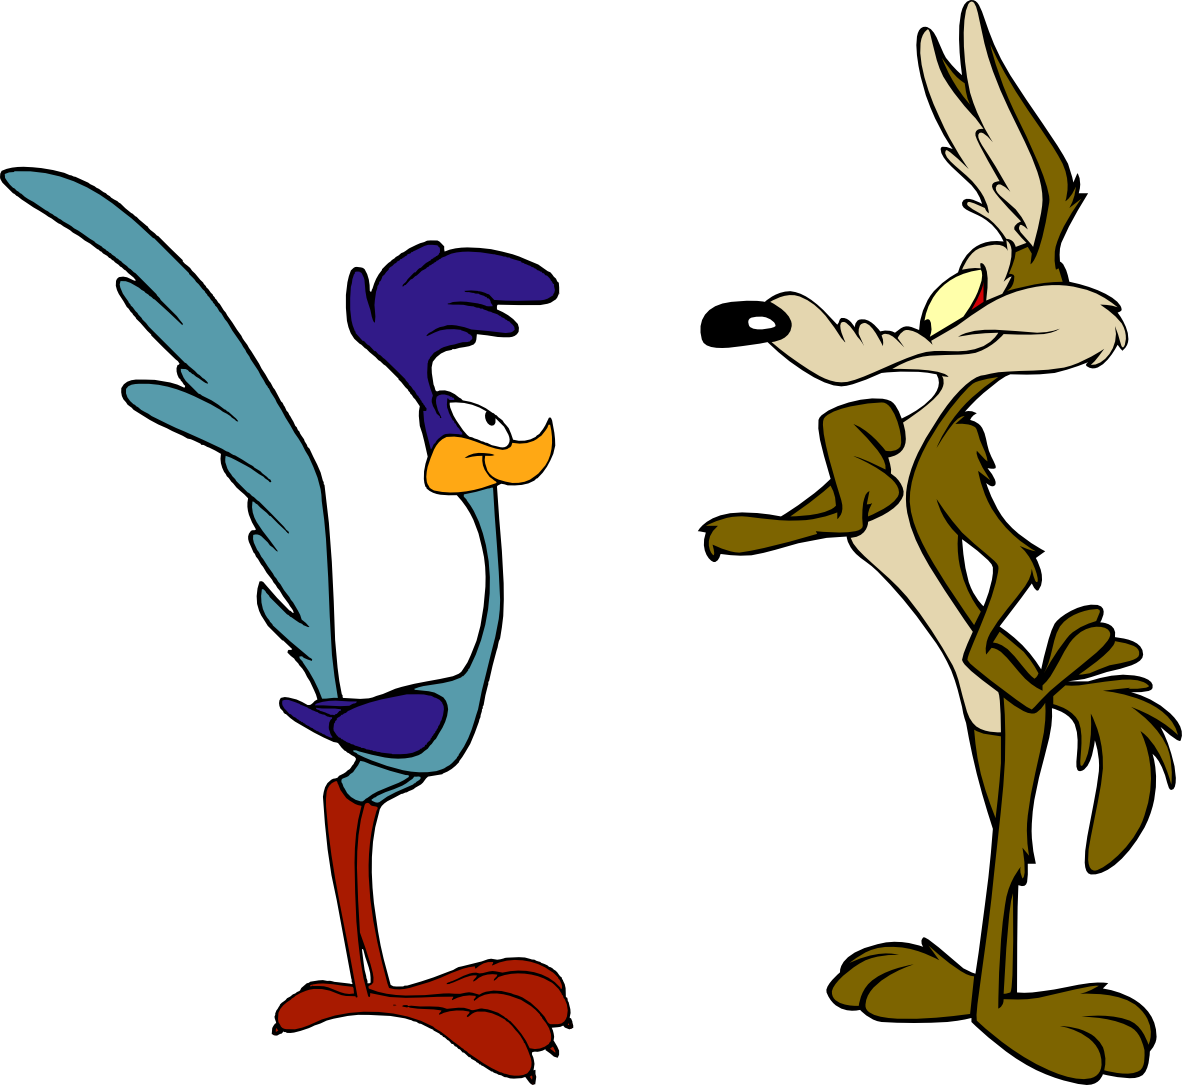 Roadrunner And Coyote - Road Runner And Wiley Coyote (1182x1085)